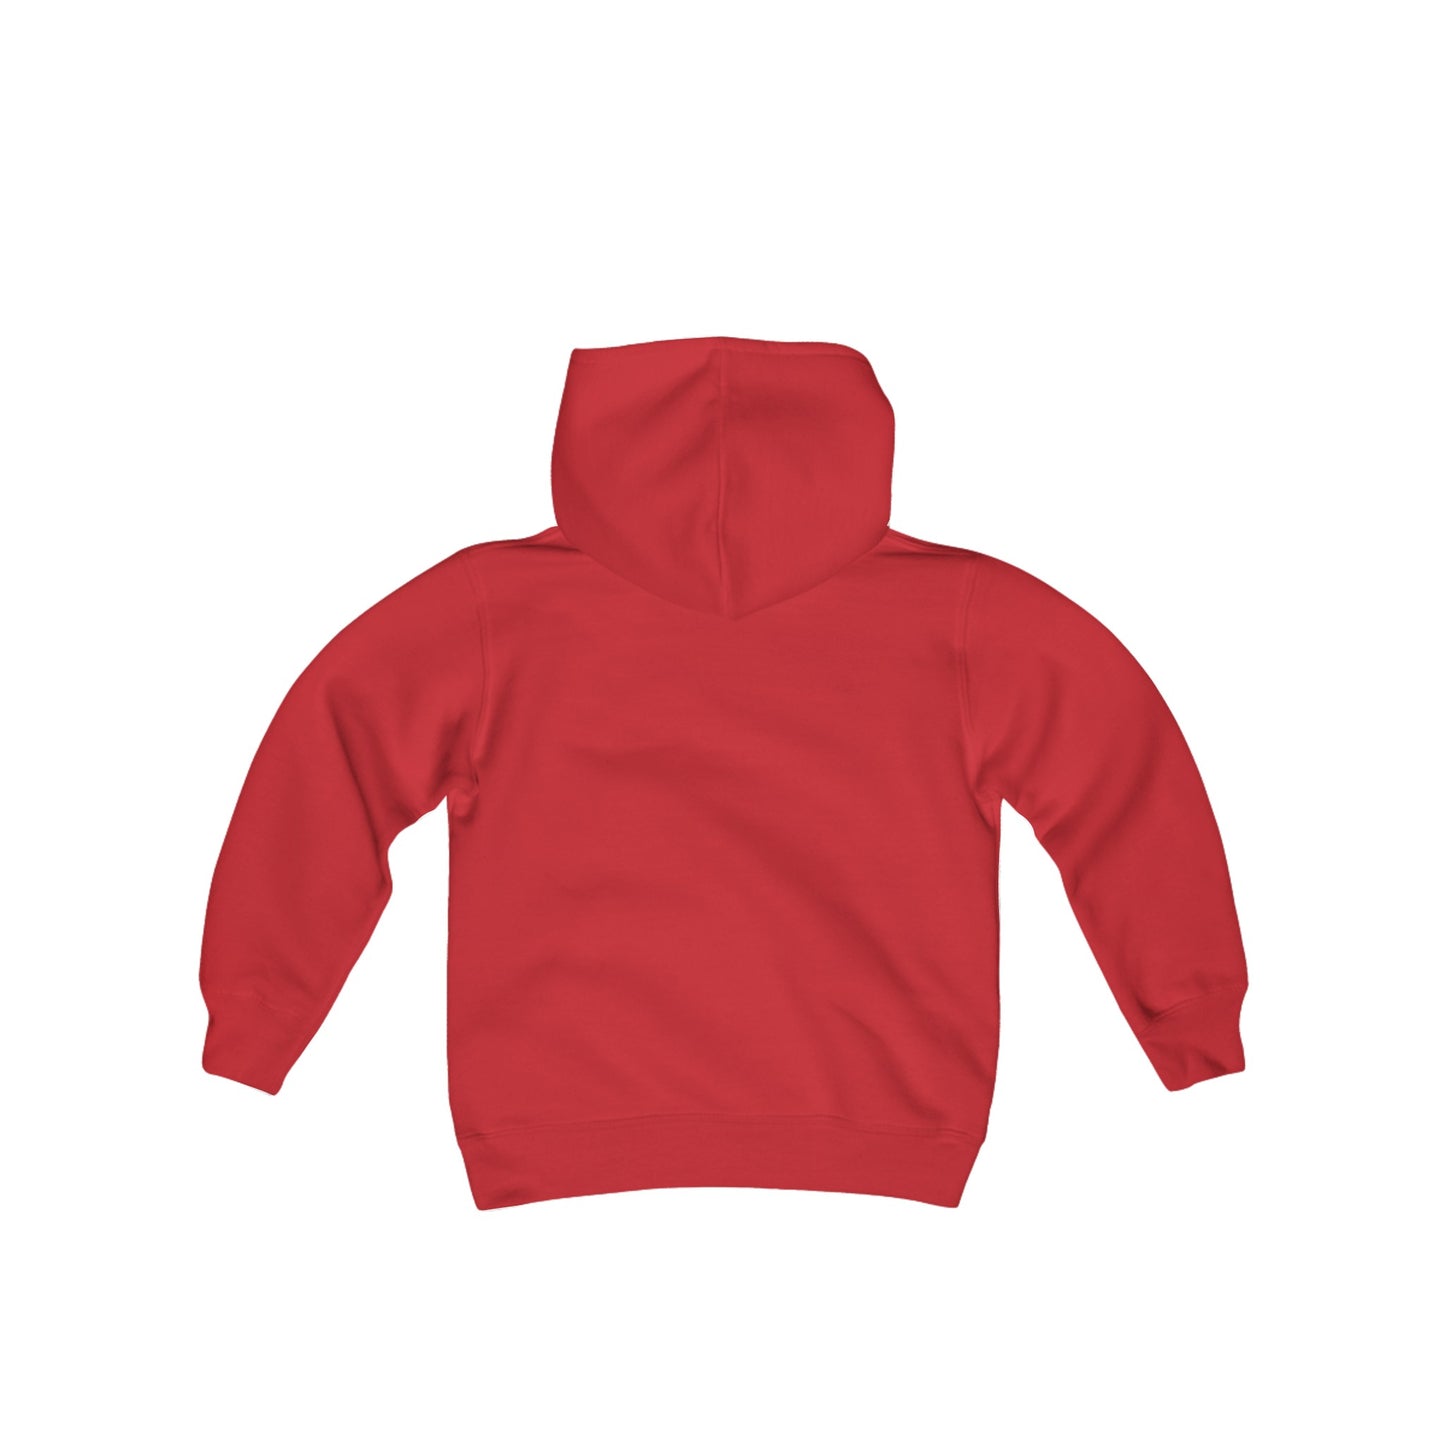 The Elements Youth Heavy Blend Hooded Sweatshirt (Light)